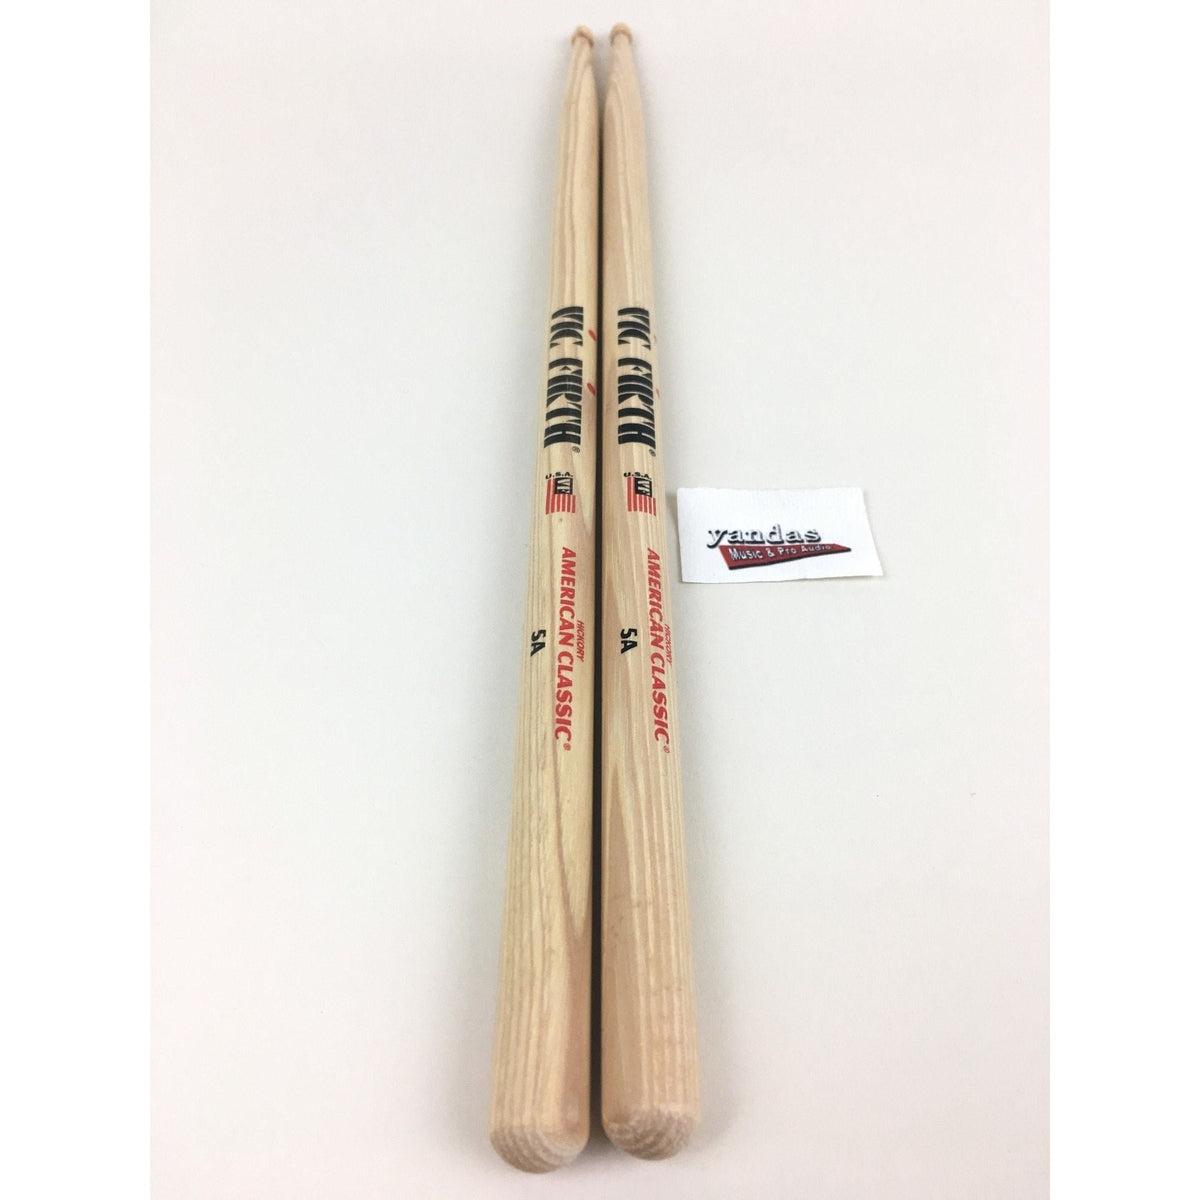 Vic Firth American Classic 5A Drumsticks Buy 3 Get 1 Free